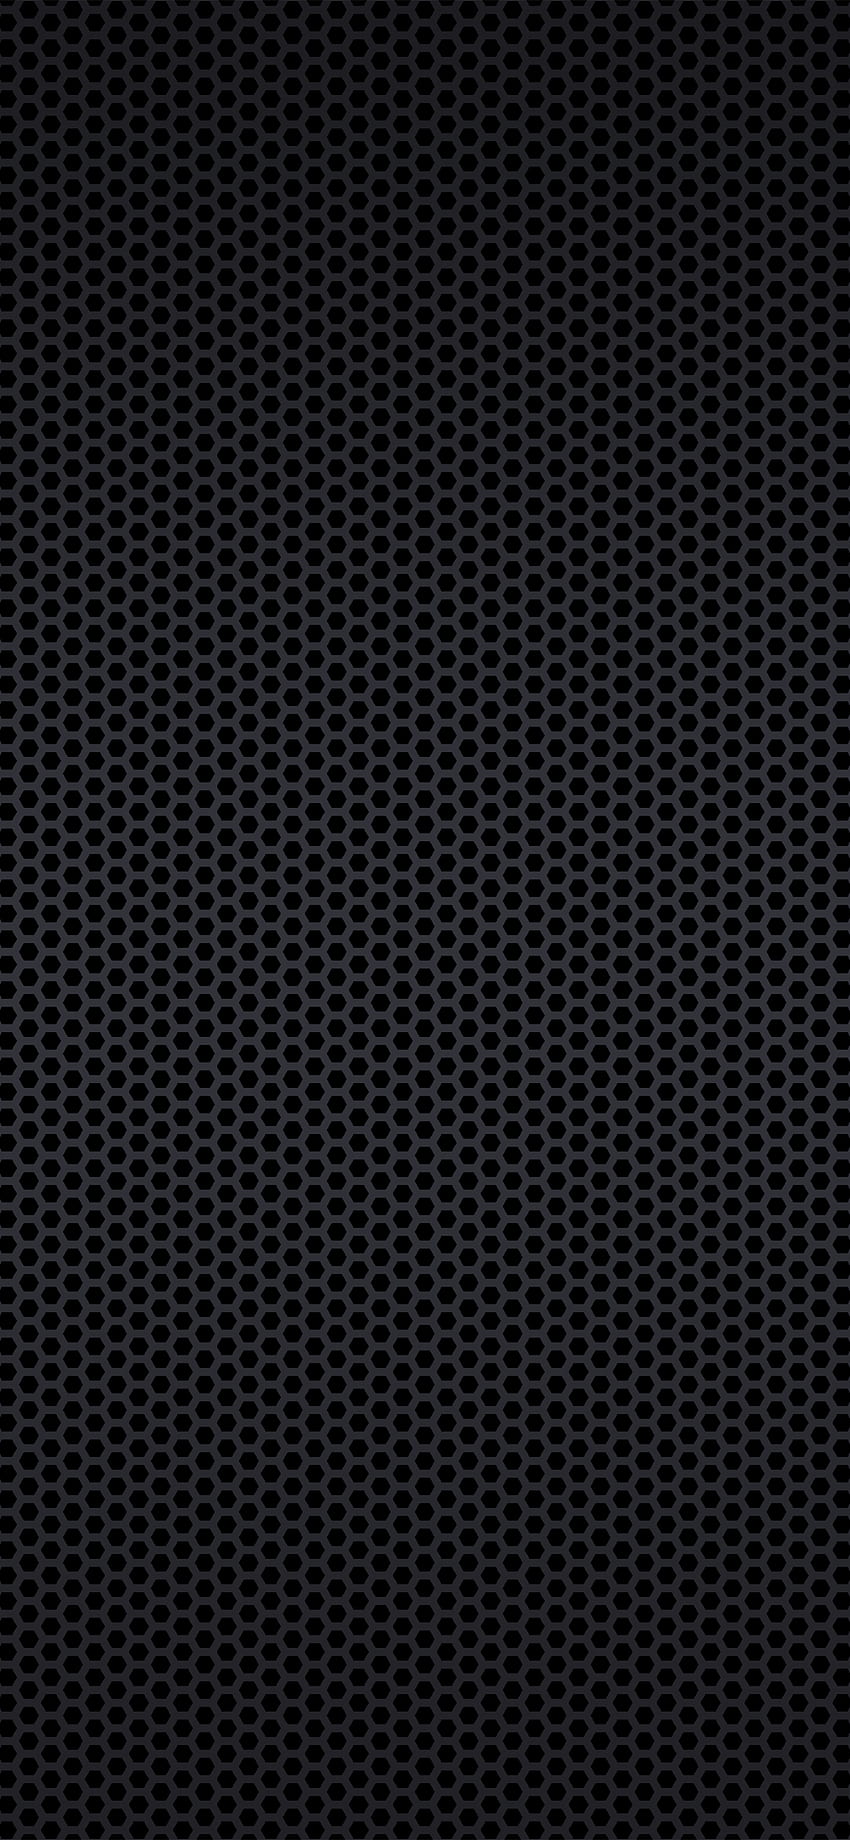 iphone backgrounds patterns